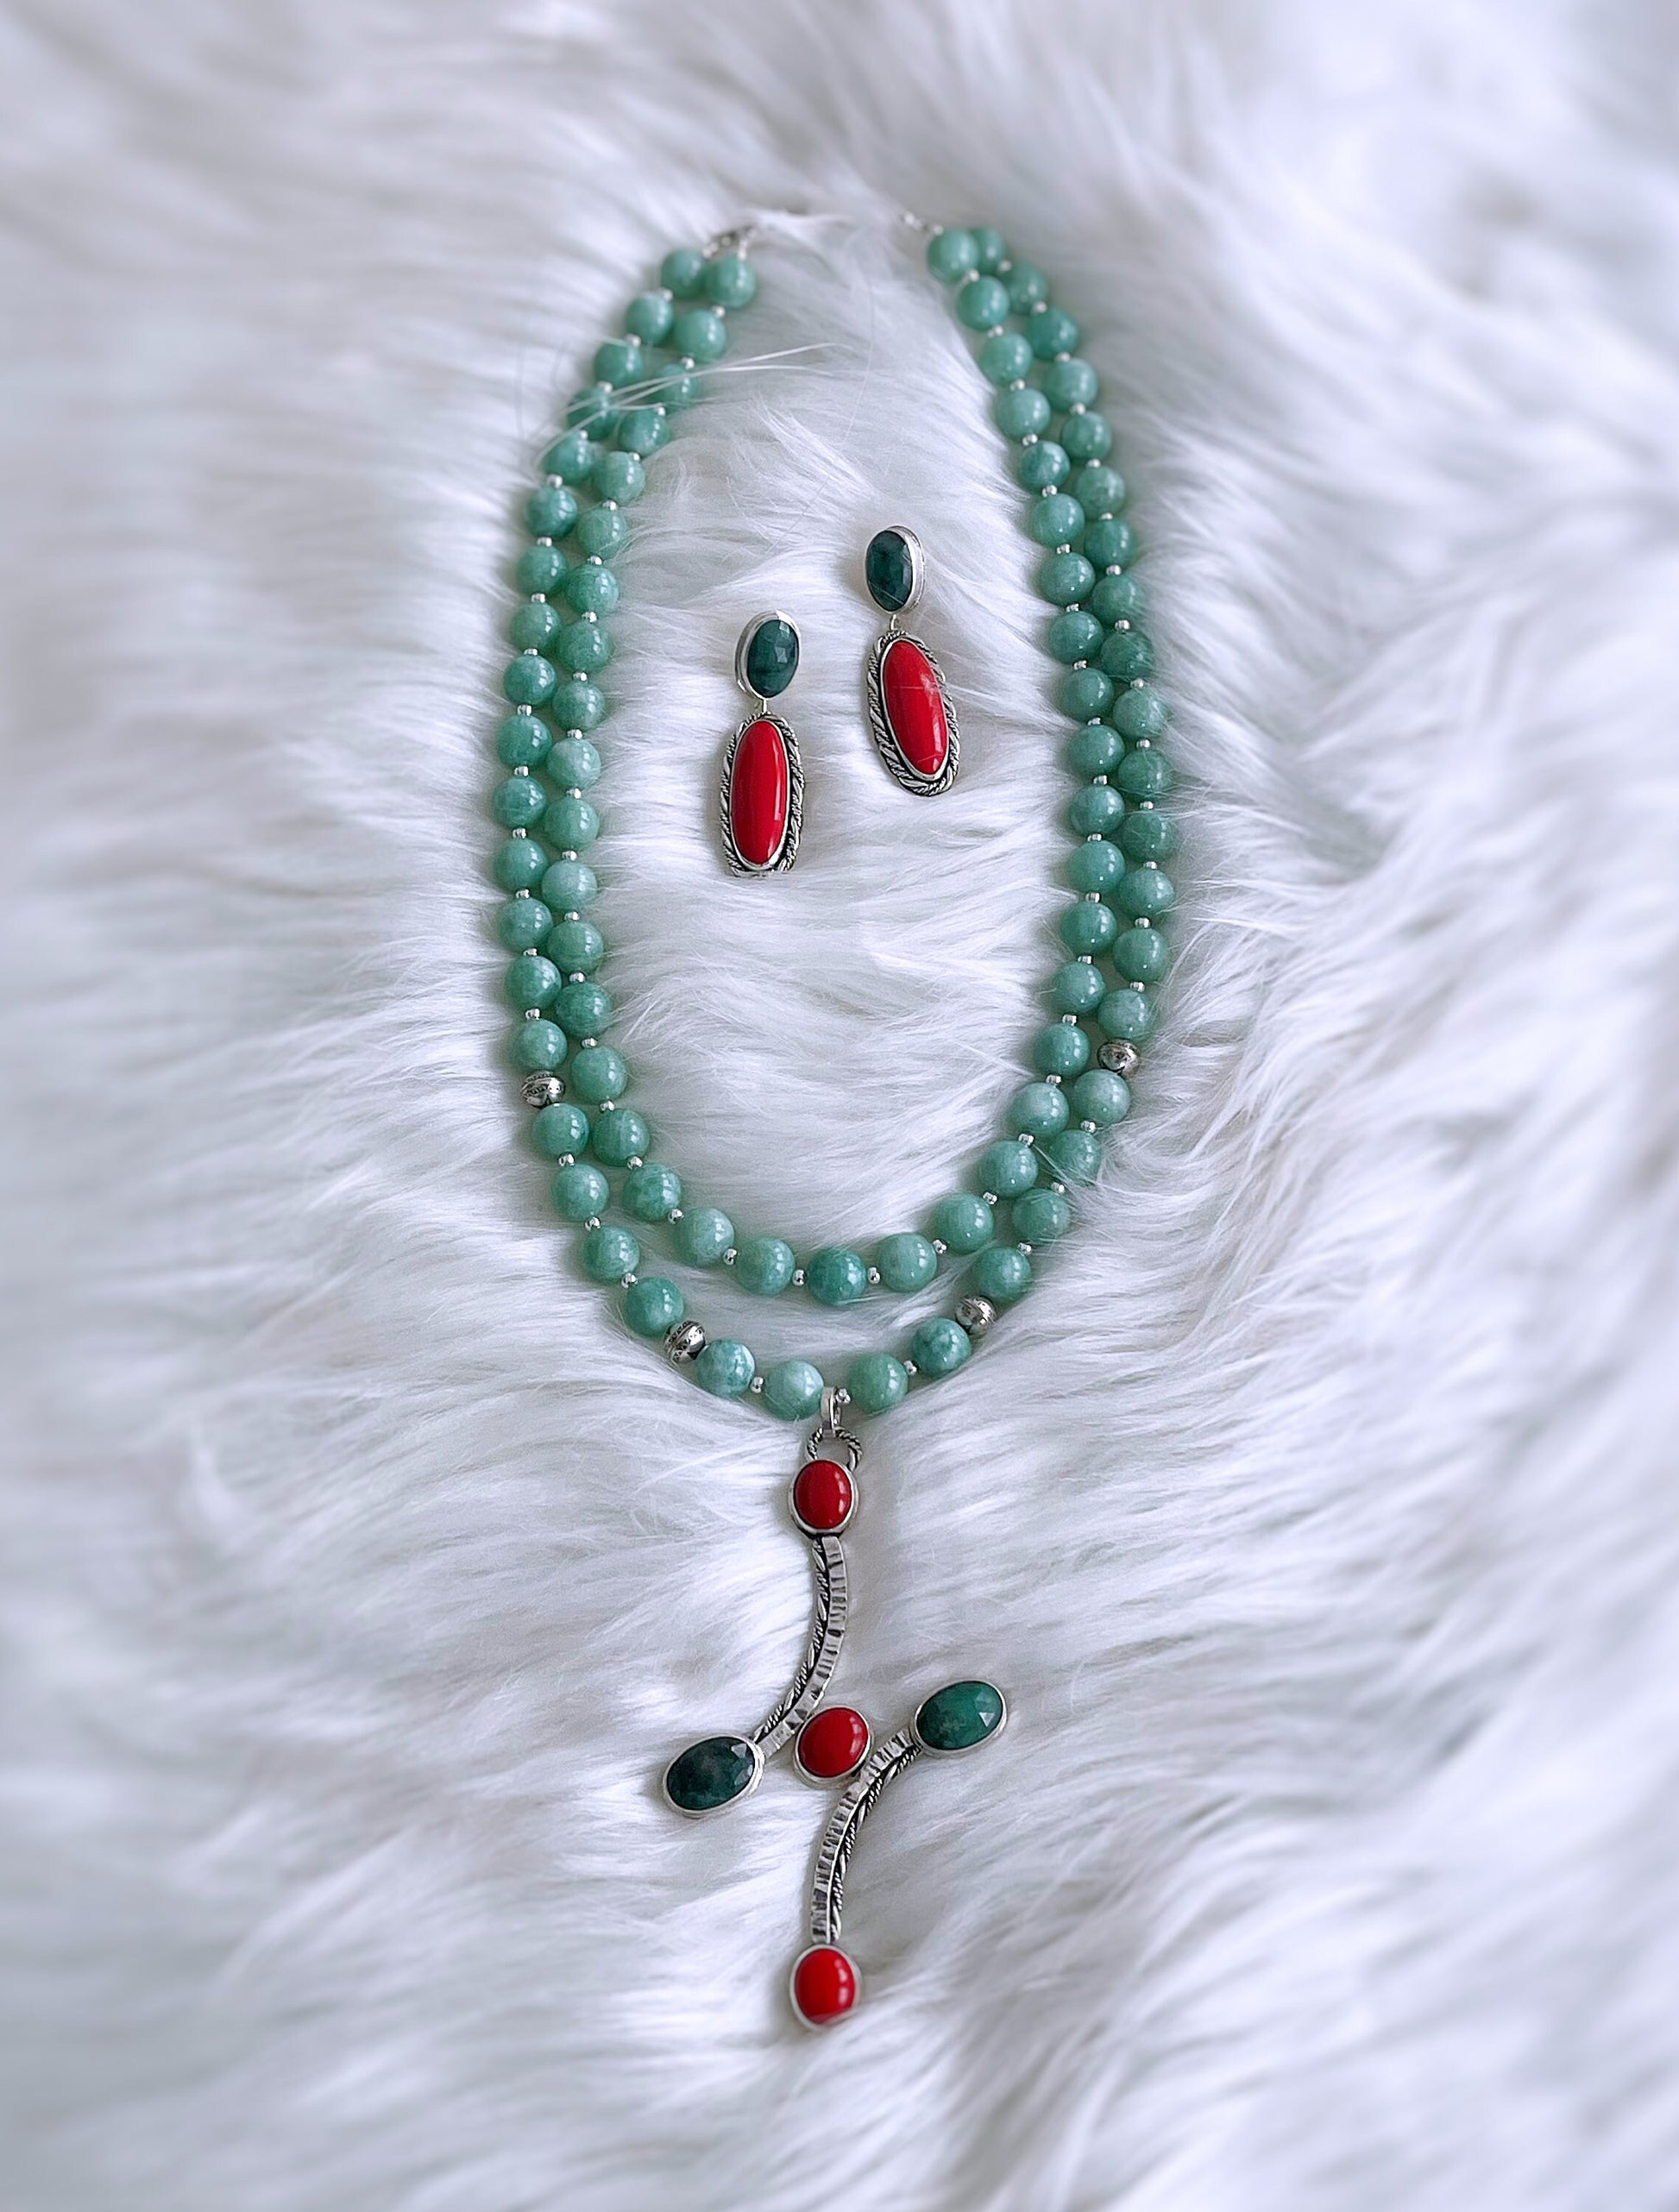 Green Jade, Emerald and Coral beaded necklace